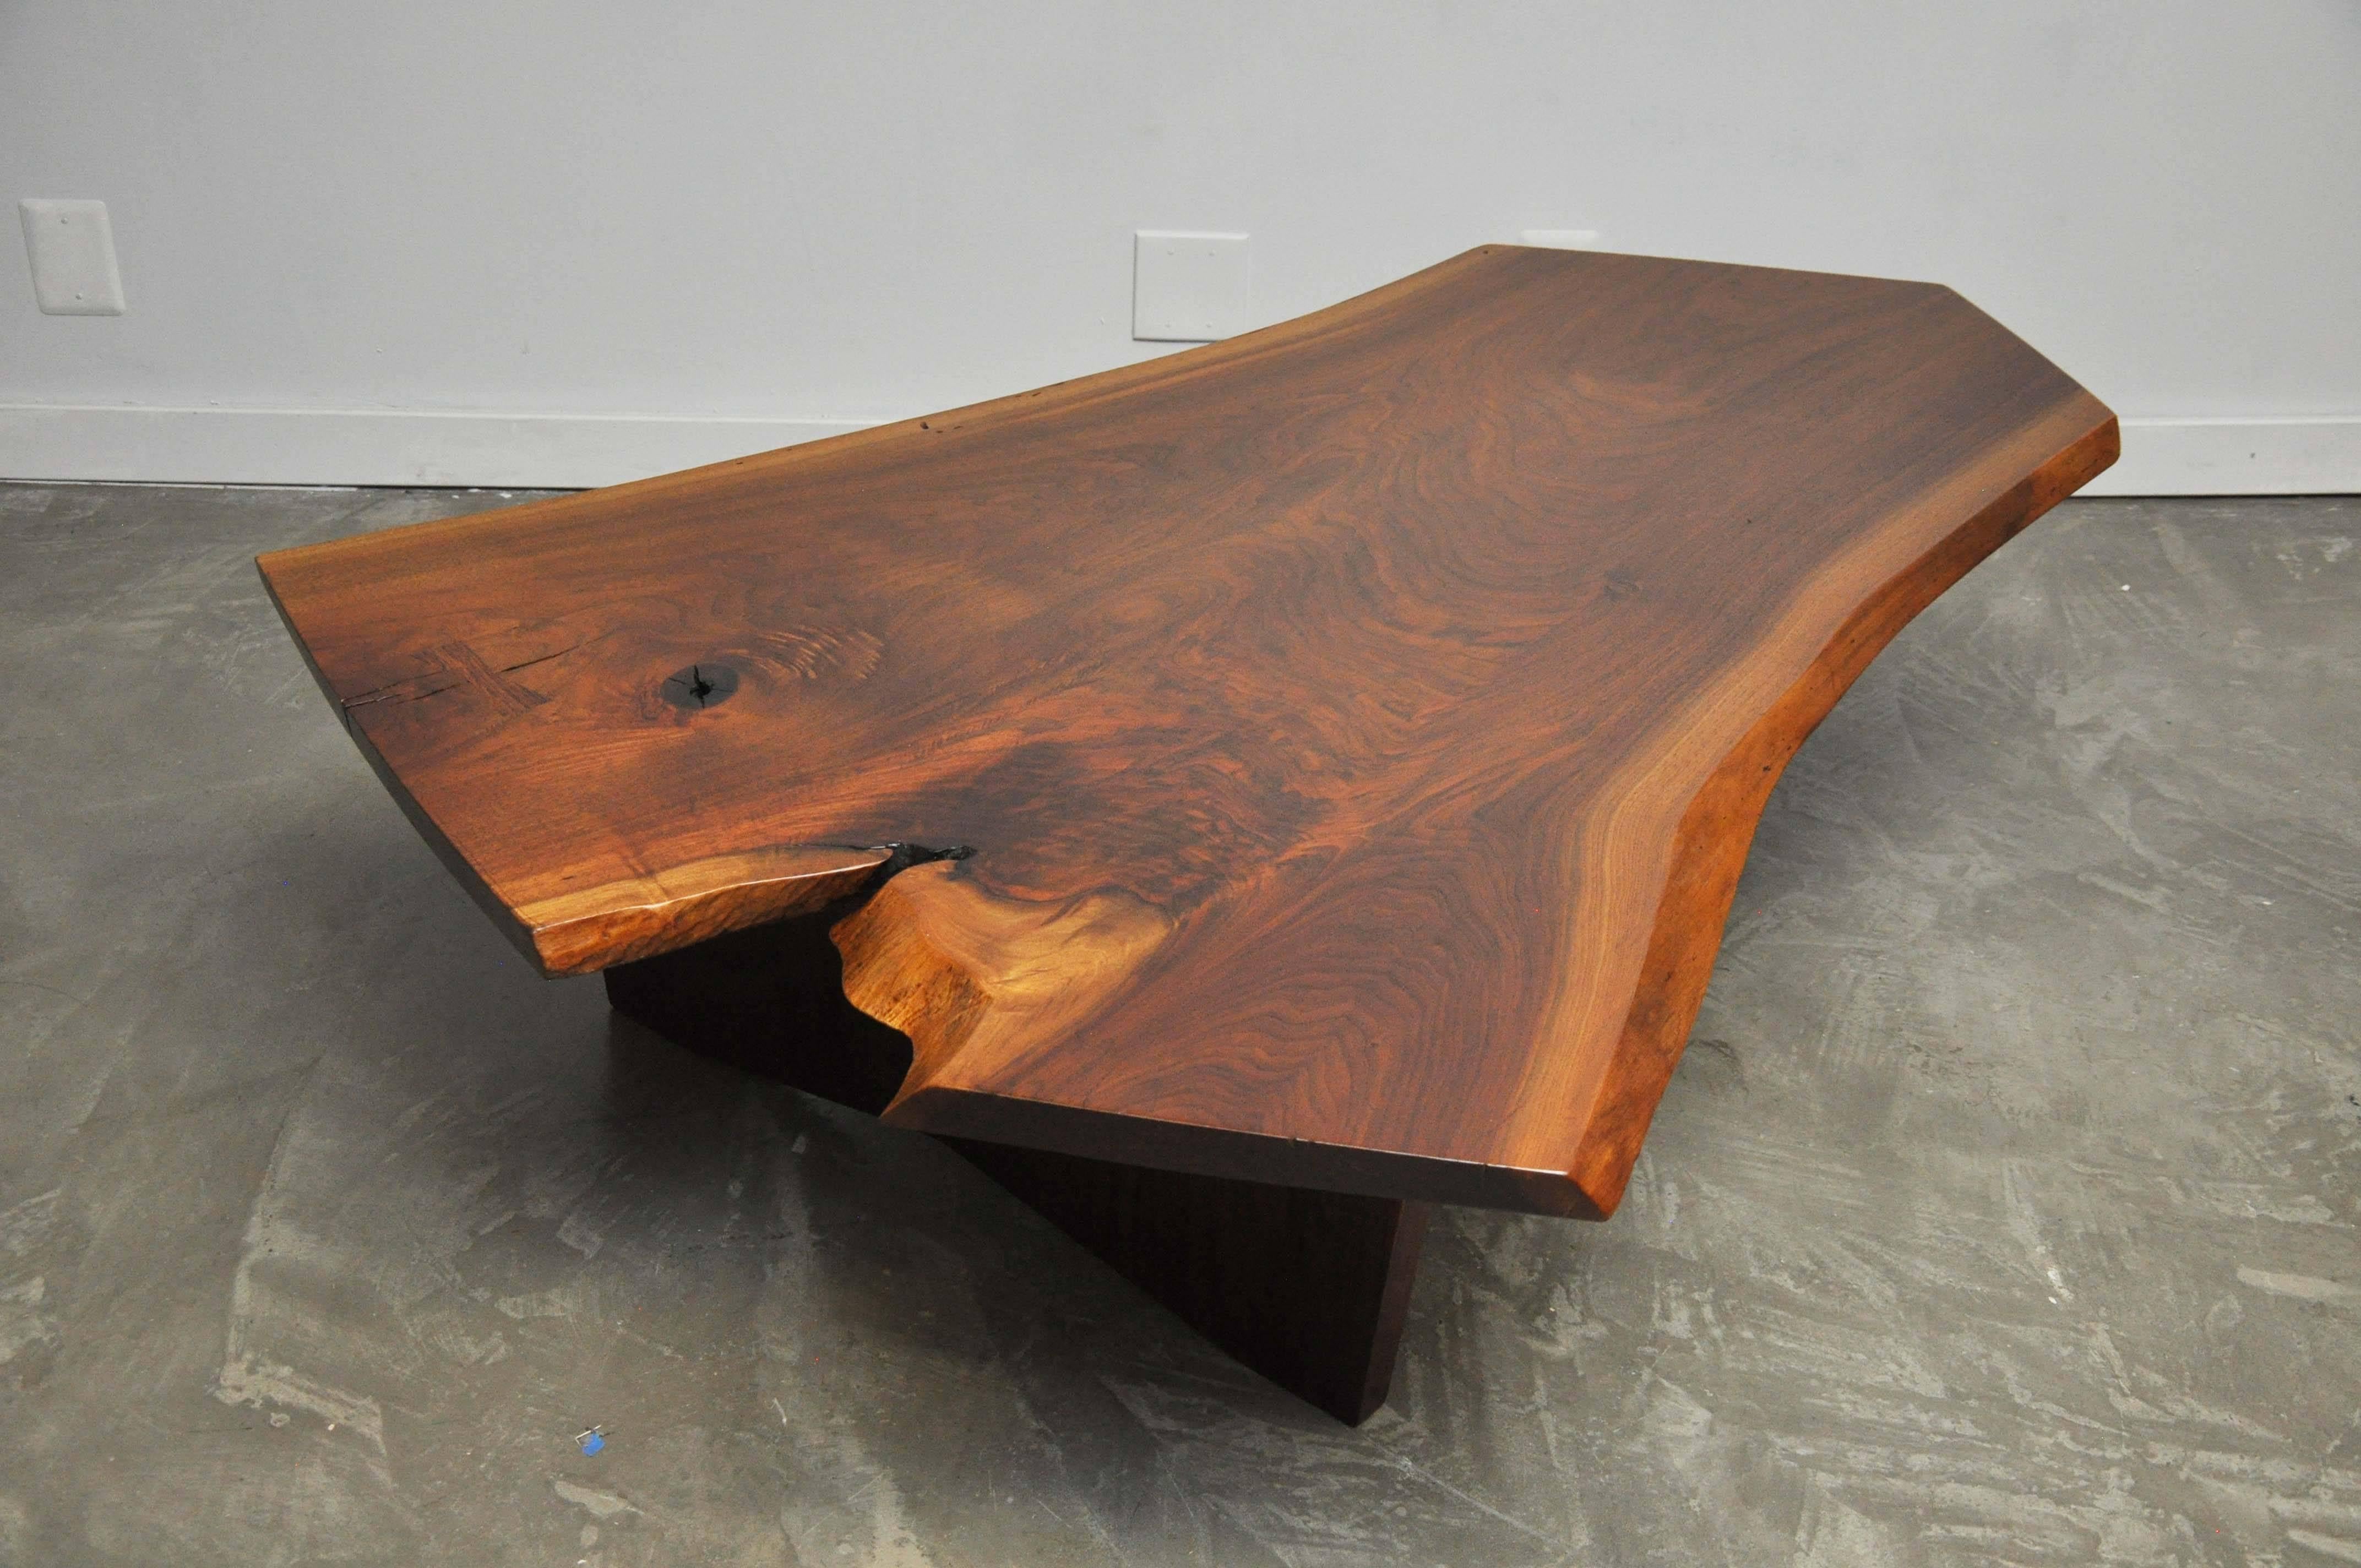 Walnut slab conoid coffee table by George Nakashima, circa 1960s. Beautiful wood grain, knot and patterning, with original rosewood butterfly joint. An incredible piece from Nakashima Studio and a monumental size at 68